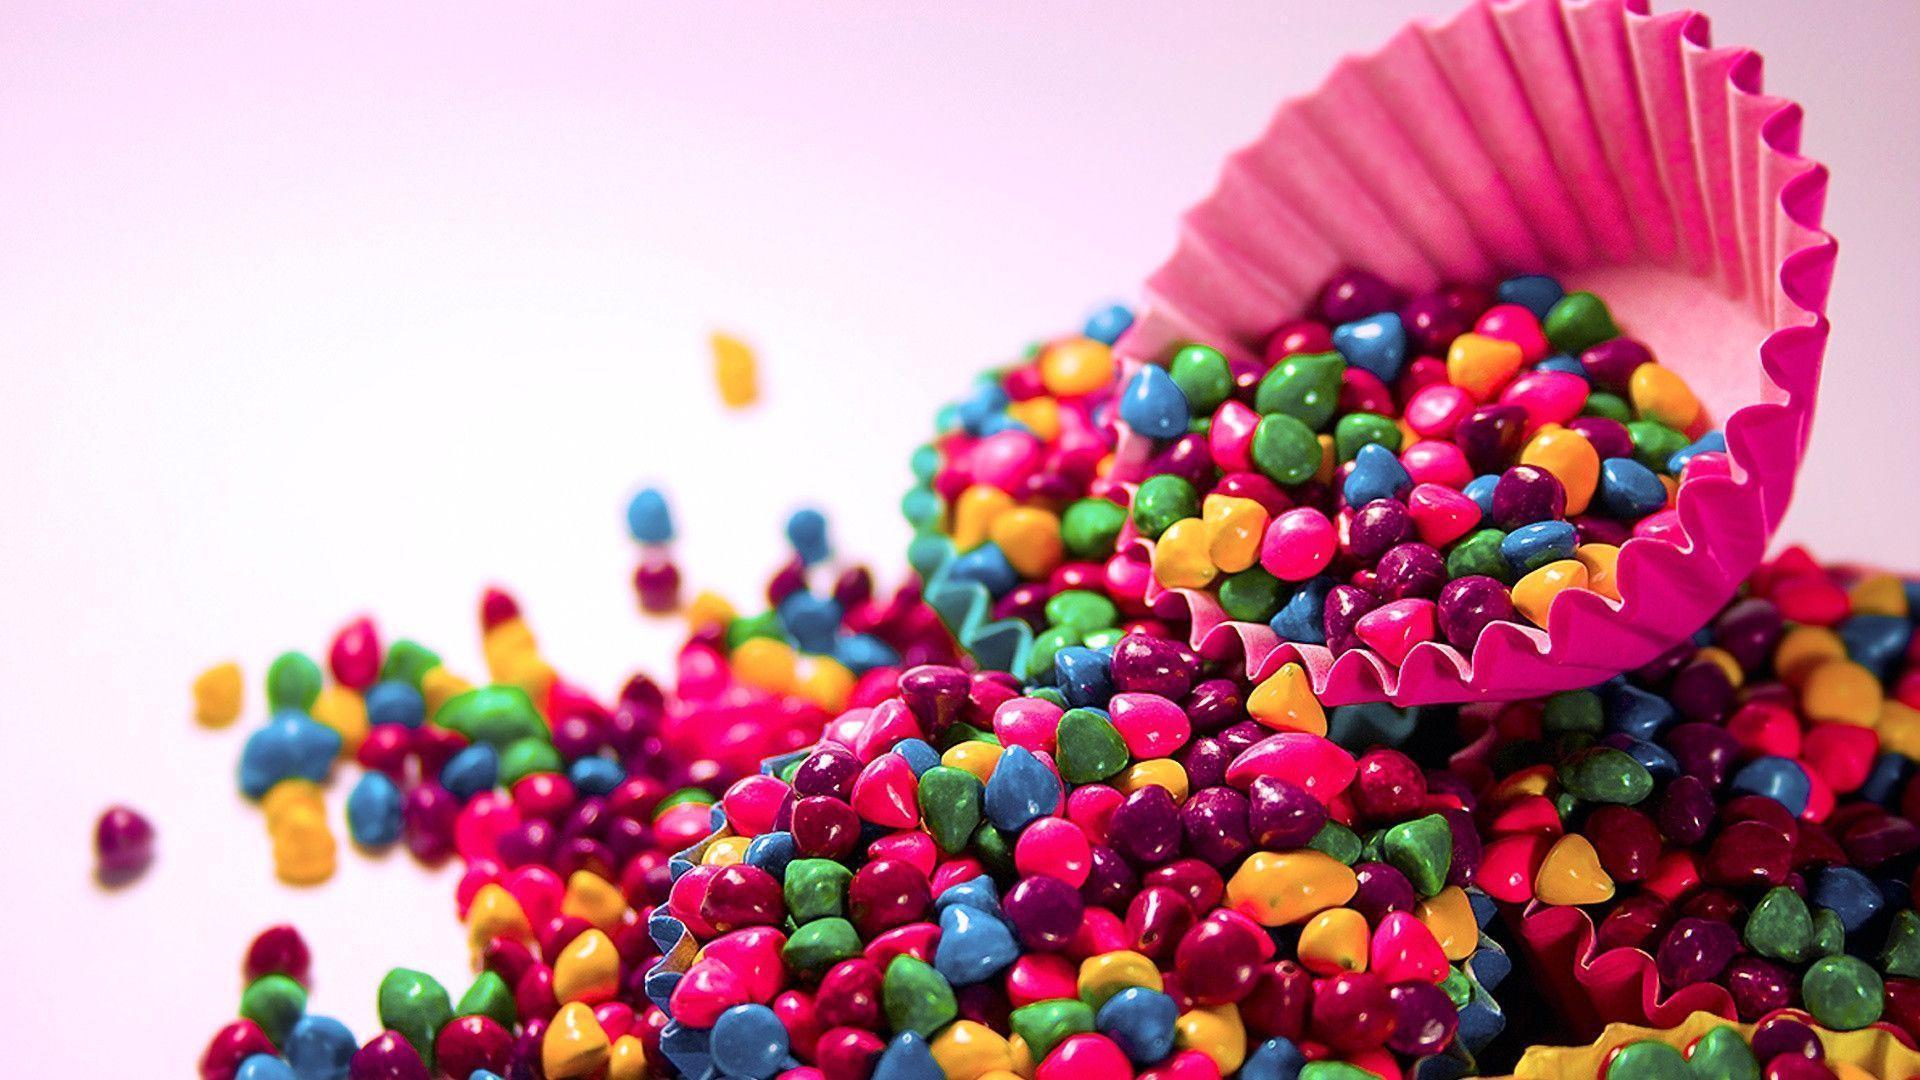 Colorful Candys 1920×1080 New HD Wallpaper 2013 Download Free